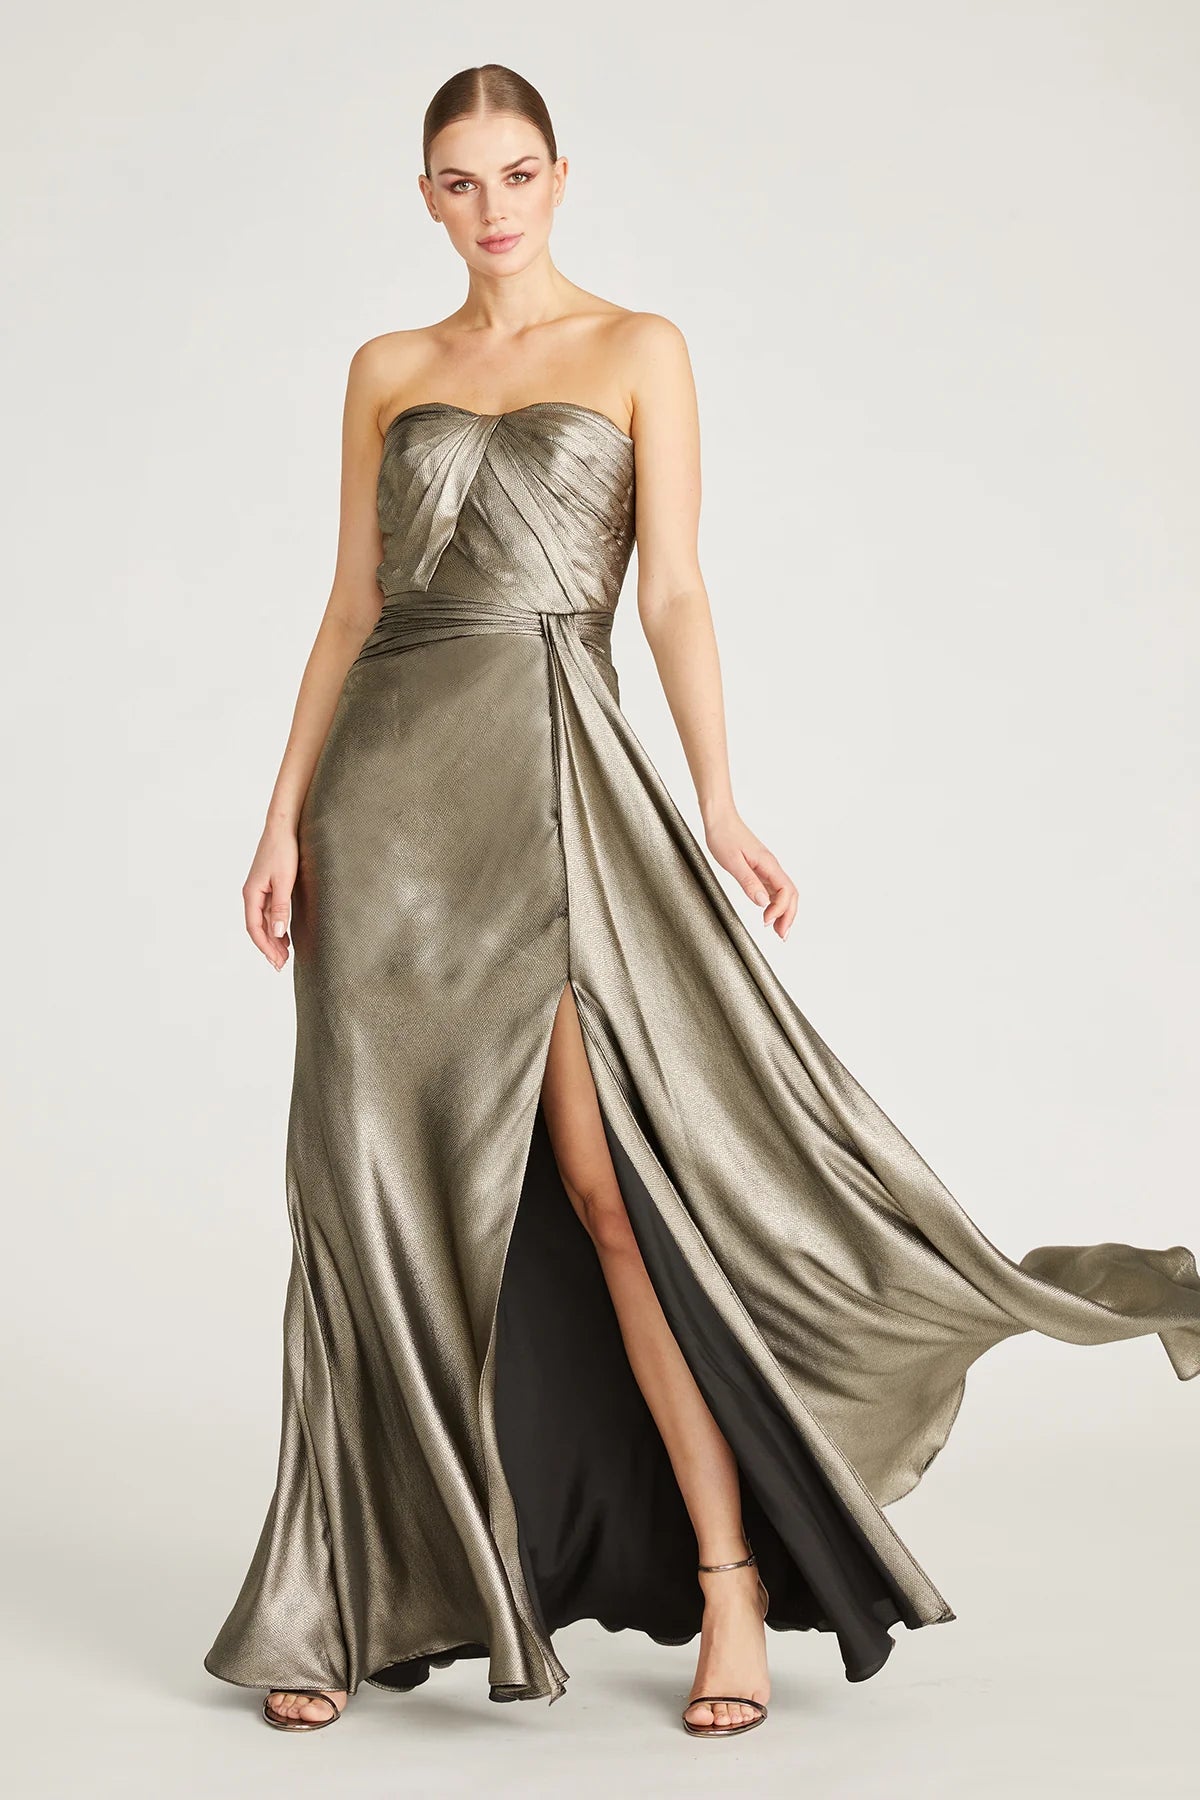 Discover sophistication with Theia's strapless satin gown featuring a sweetheart neckline and elegant column silhouette. Ideal for special evenings and mother-of-the-bride/groom occasions. Available at Madeline's Boutique in Toronto and Boca Raton, Florida.